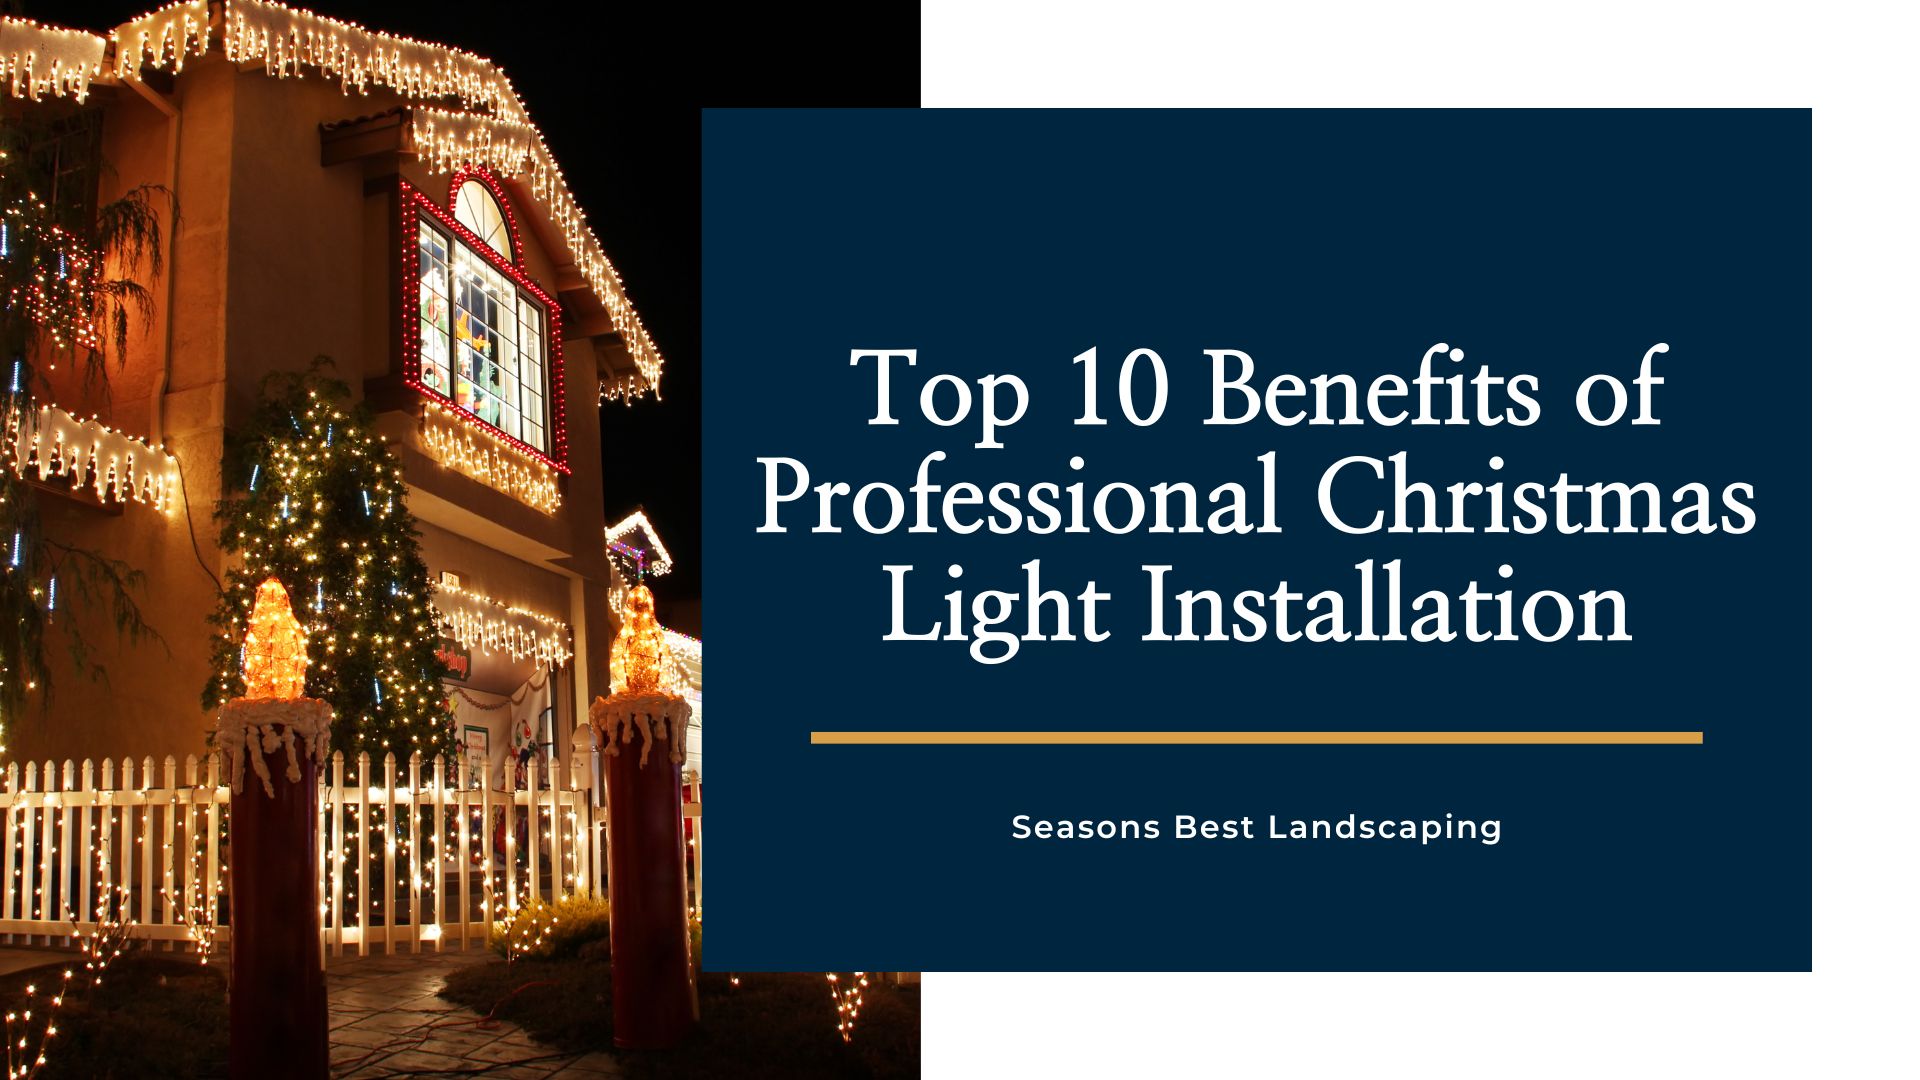 Top 10 Benefits of Professional Christmas Light Installation - Seasons Best Landscaping